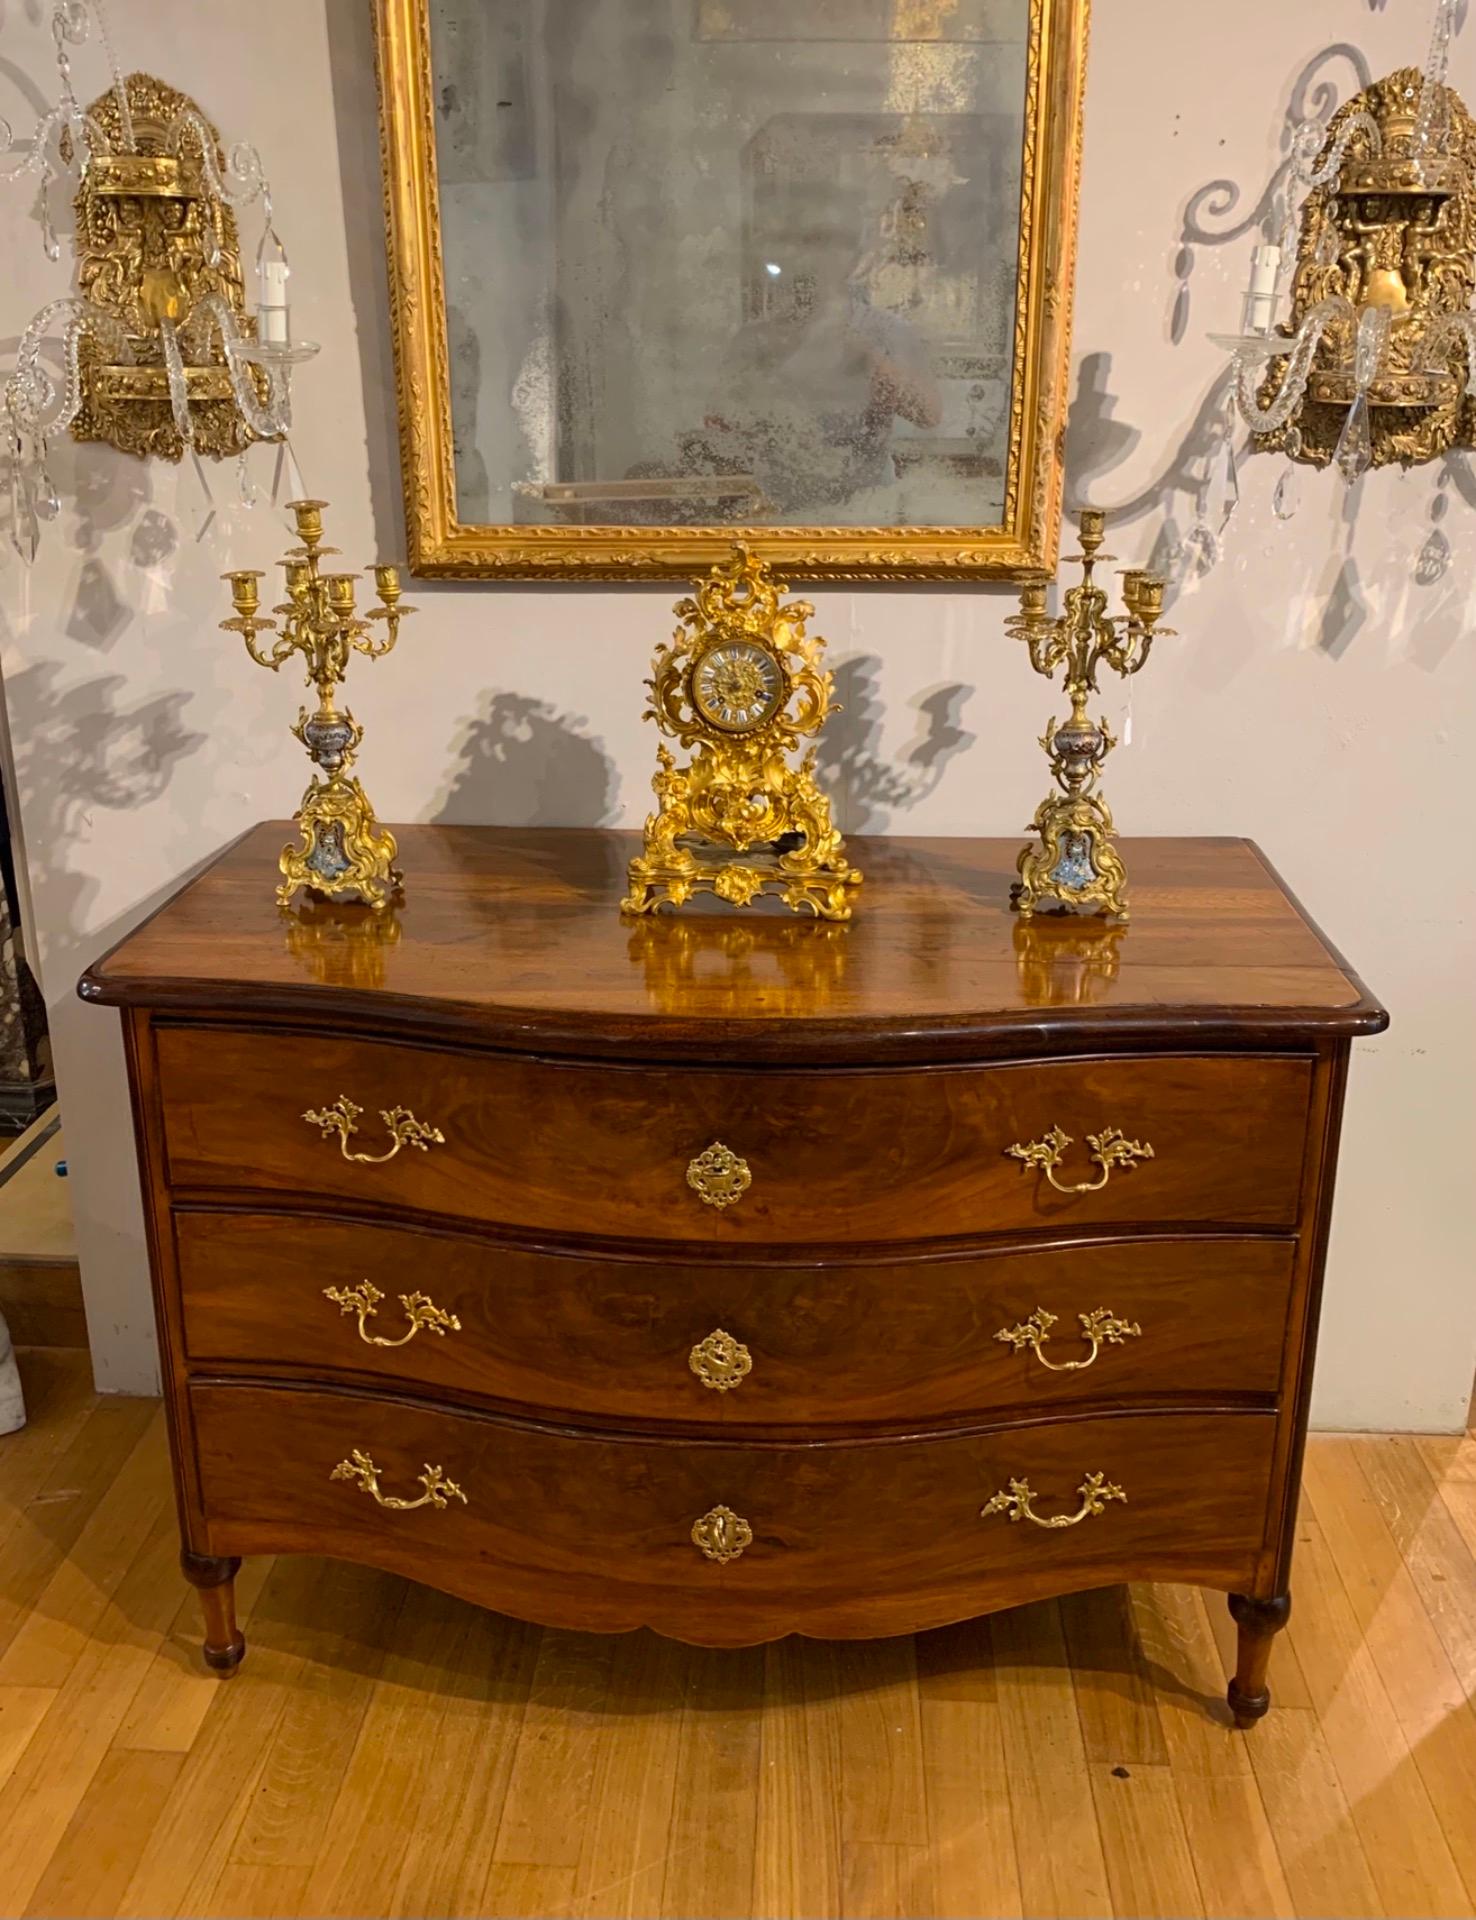 Hand-Carved 18th CENTURY VENETIAN CHEST OF DRAWERS IN SOLID AND VENEREED WALNUT  For Sale